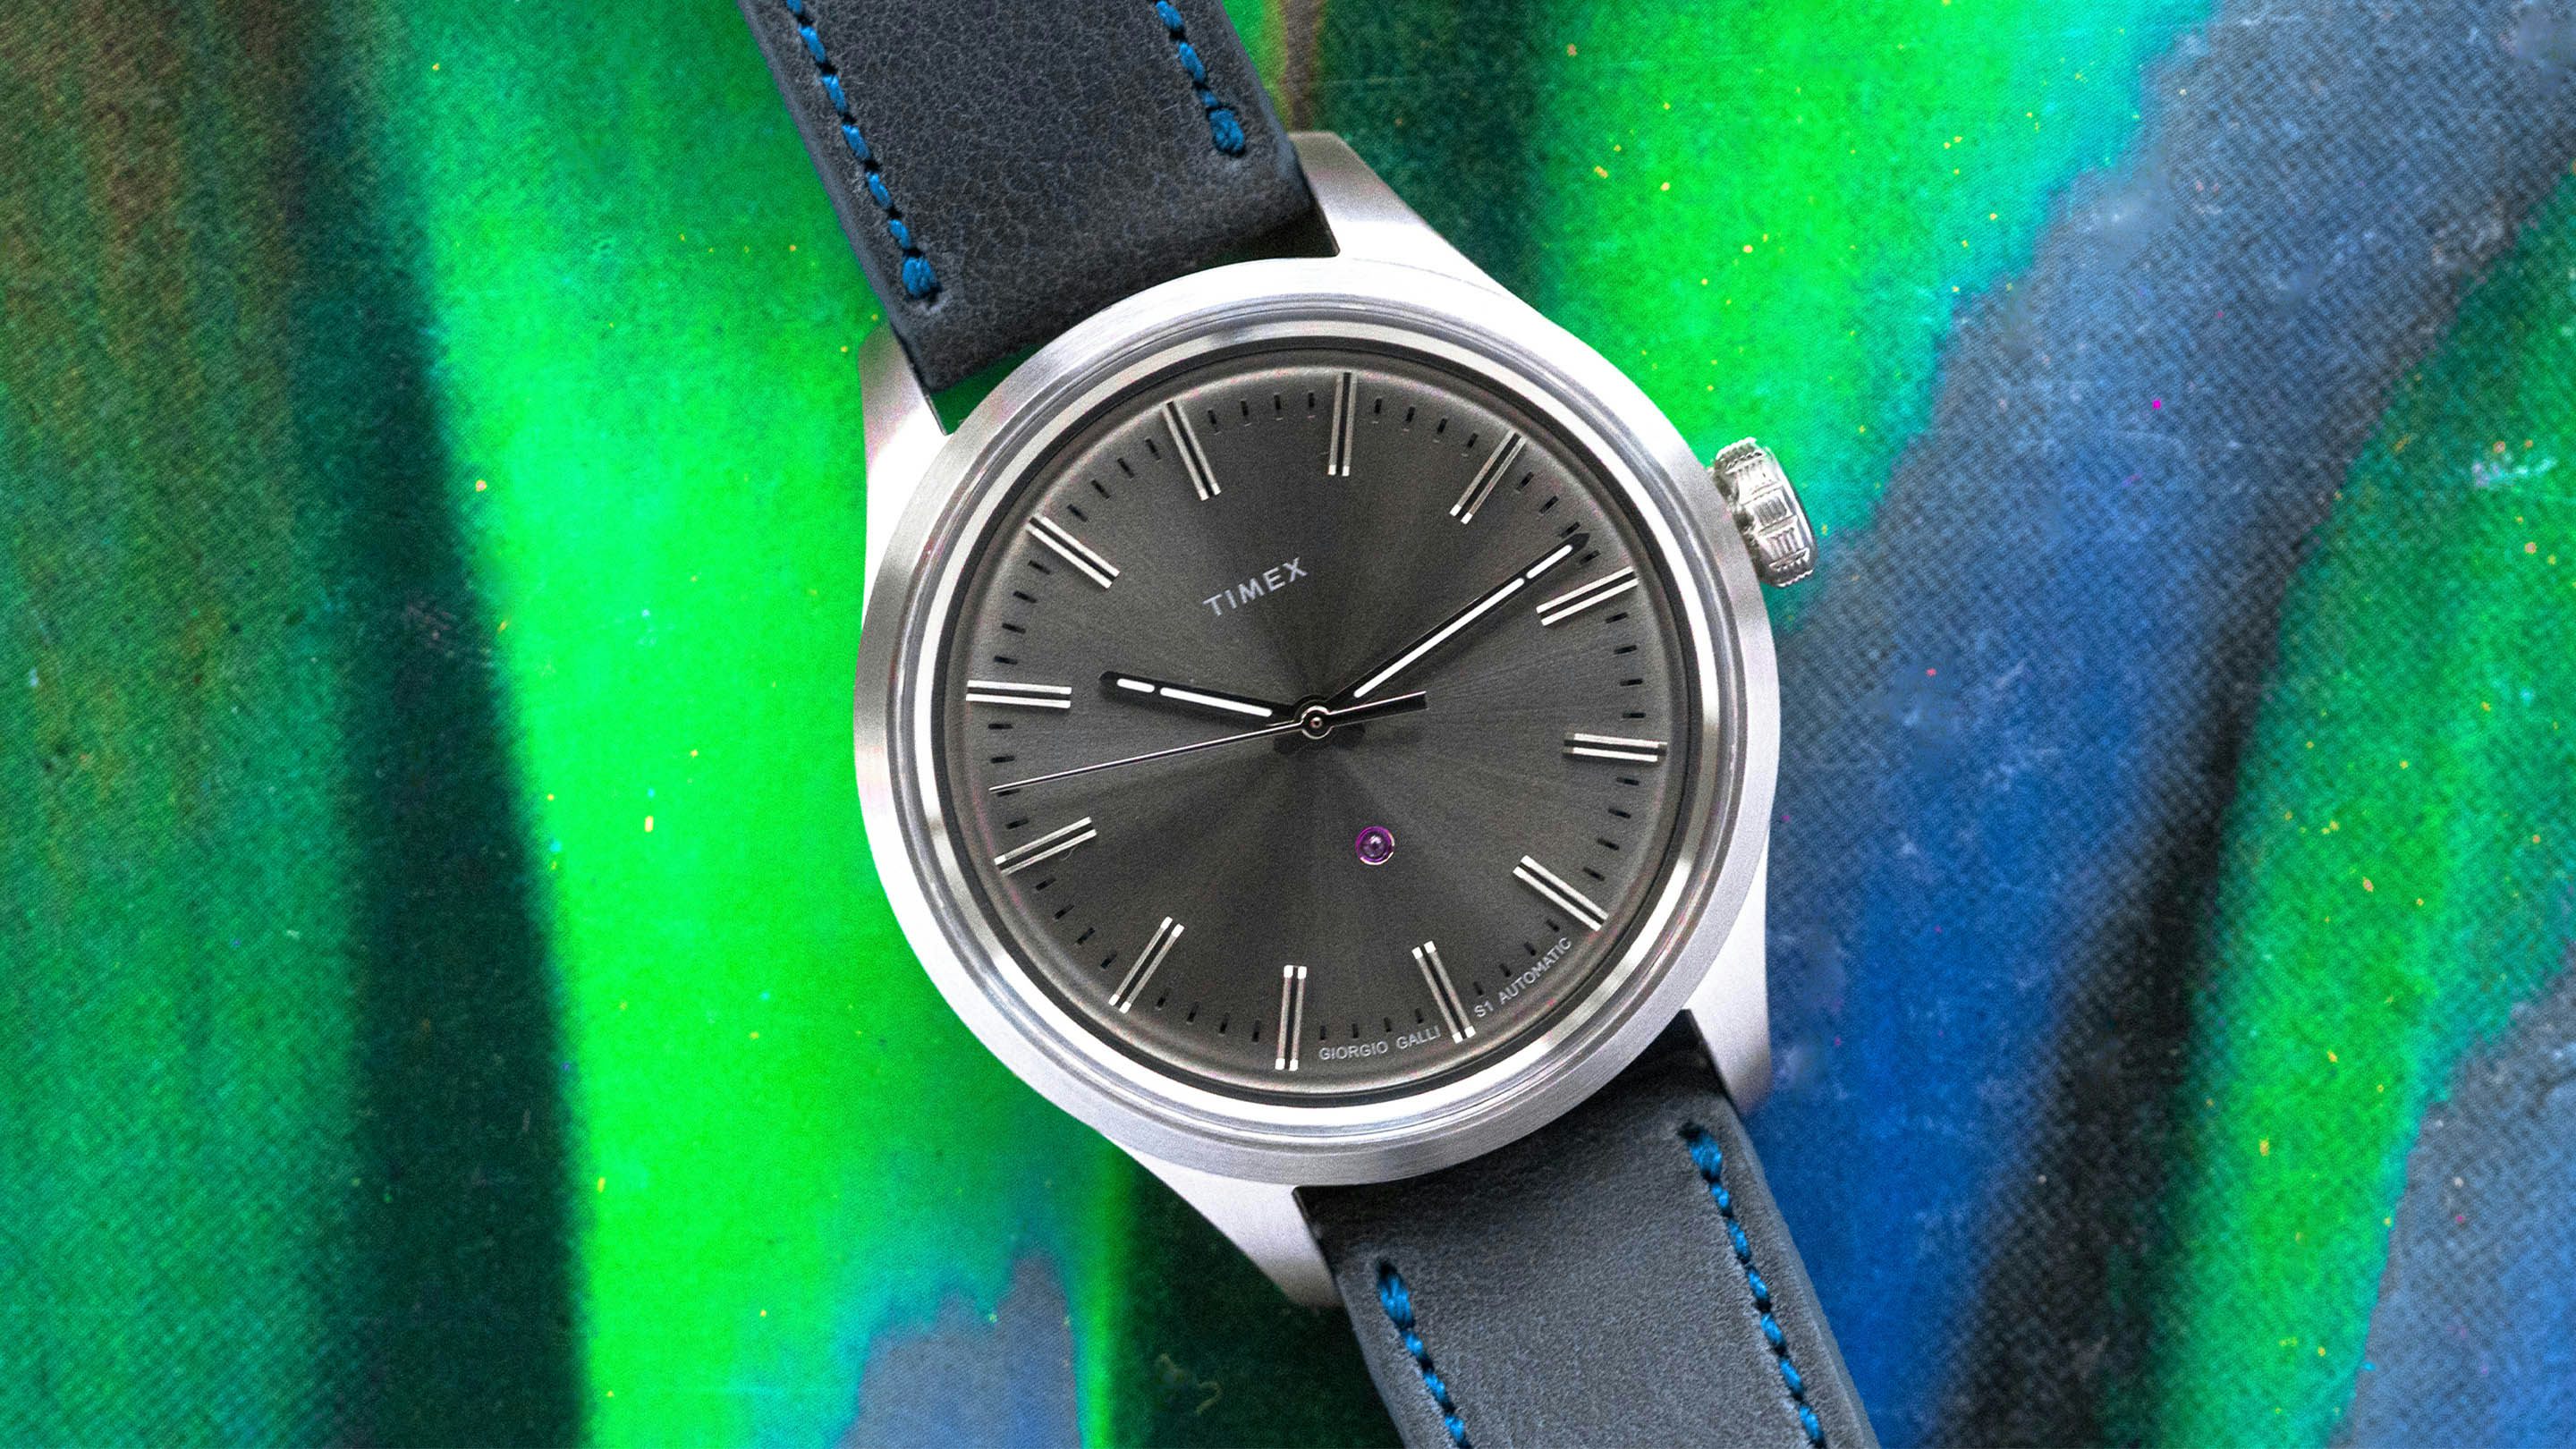 A Review Of The Timex Giorgio Galli S1 Automatic 38mm.